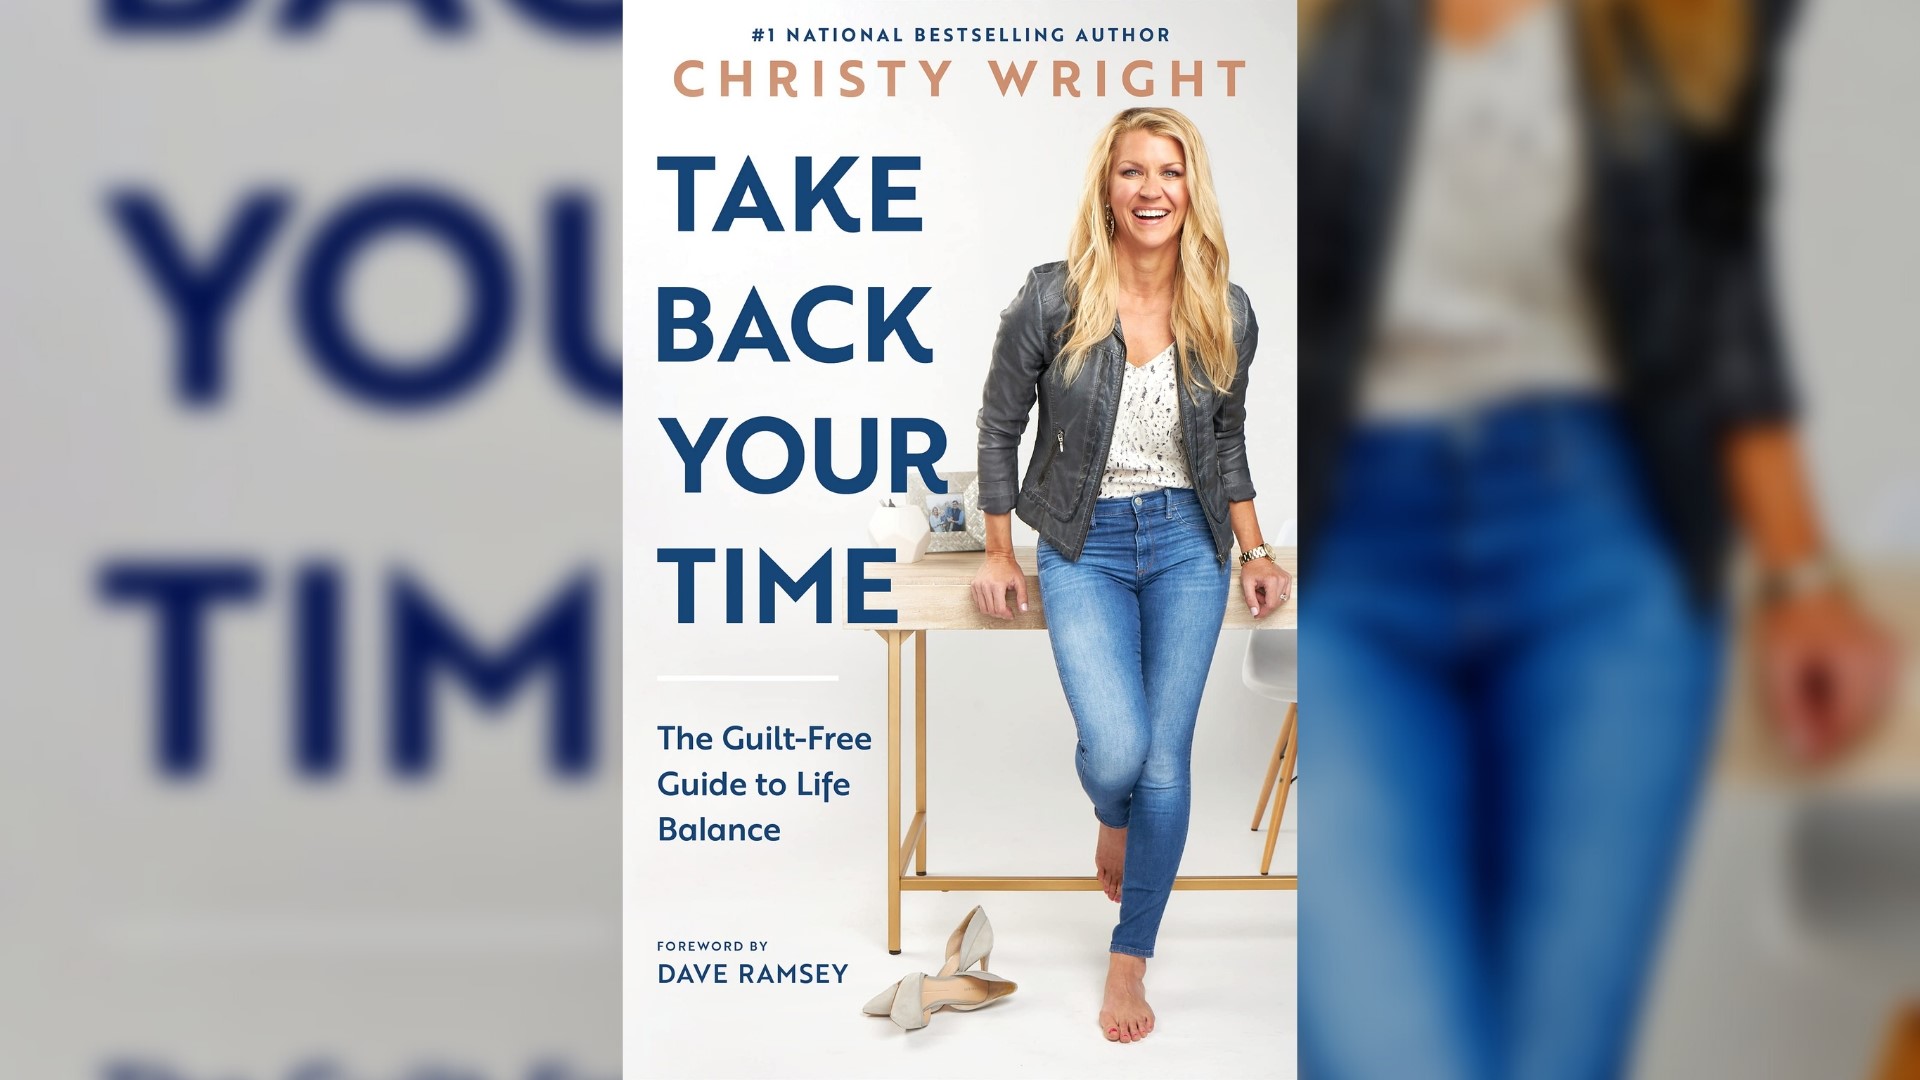 Christy Wright's new book, "Take Back Your Time," is about using technology for good to focus and achieve more of what matters to us. #newdaynw